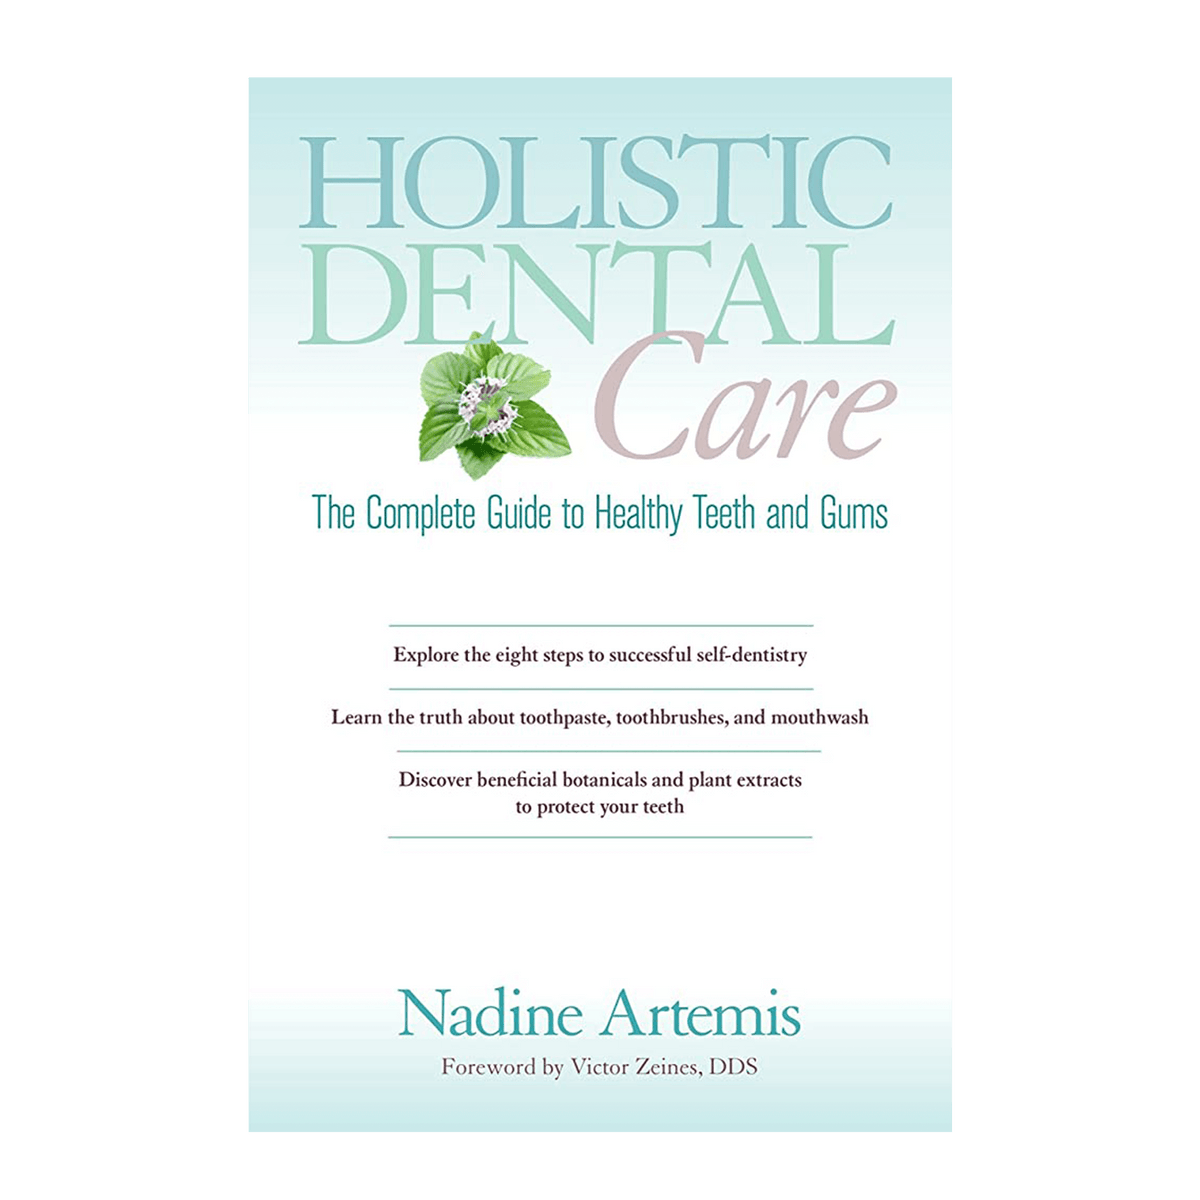 Holistic Dental Care, The Complete Guide to Healthy Teeth and Gums